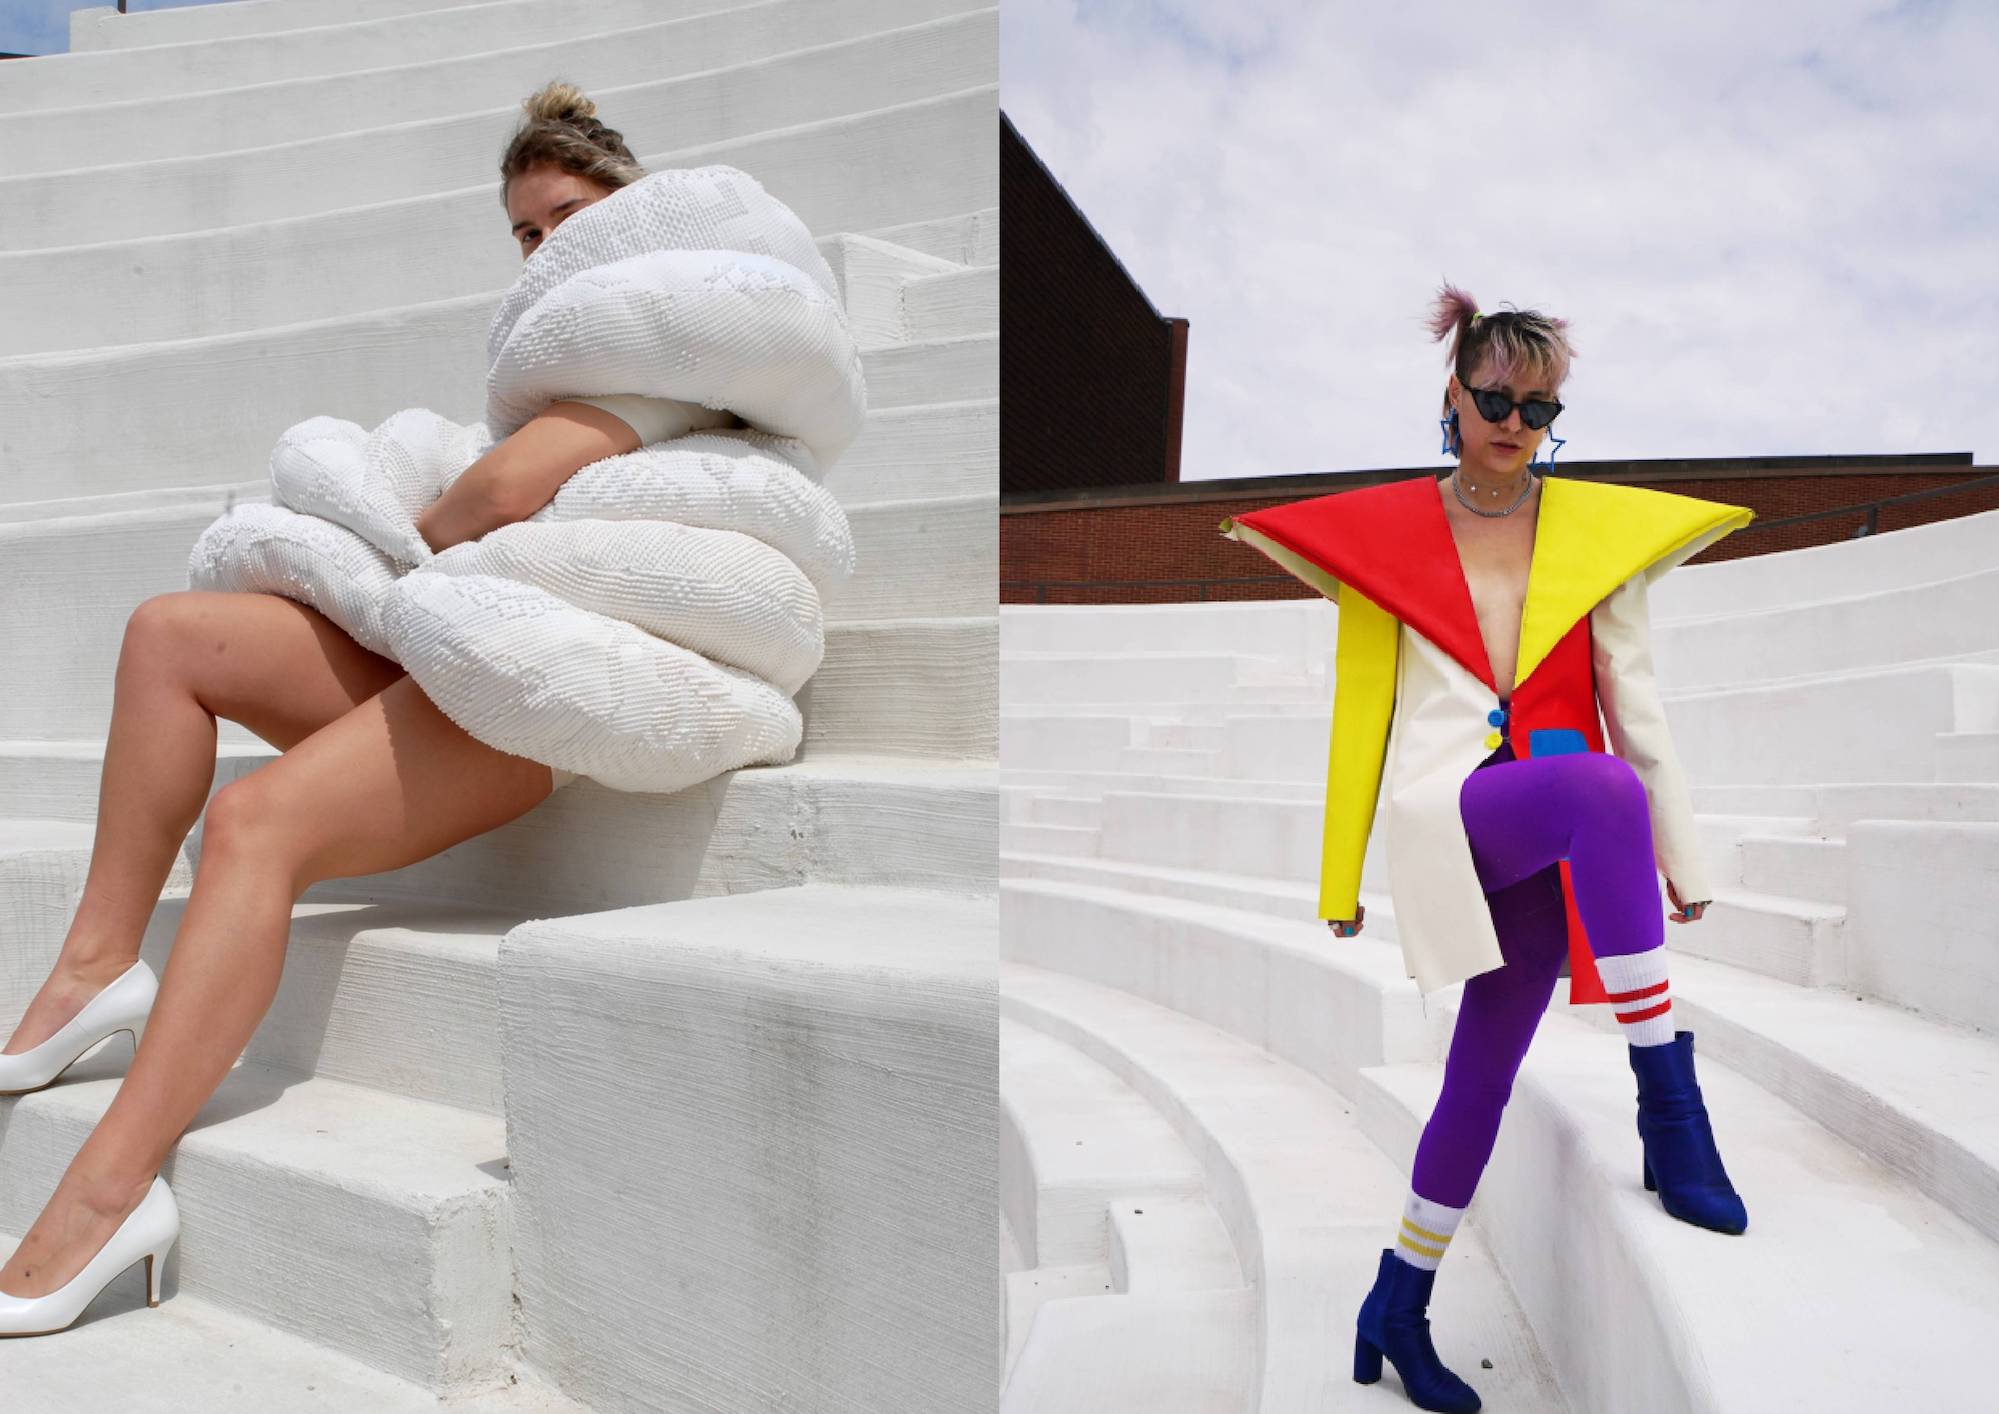 A collage of two side by side photos. In the left photo a woman sits on white stairs outside wearing a large white outfit that shields her face. In the right photo a model stands on the same stairs; she wears an extravagant purple yellow and red futuristic outfit.